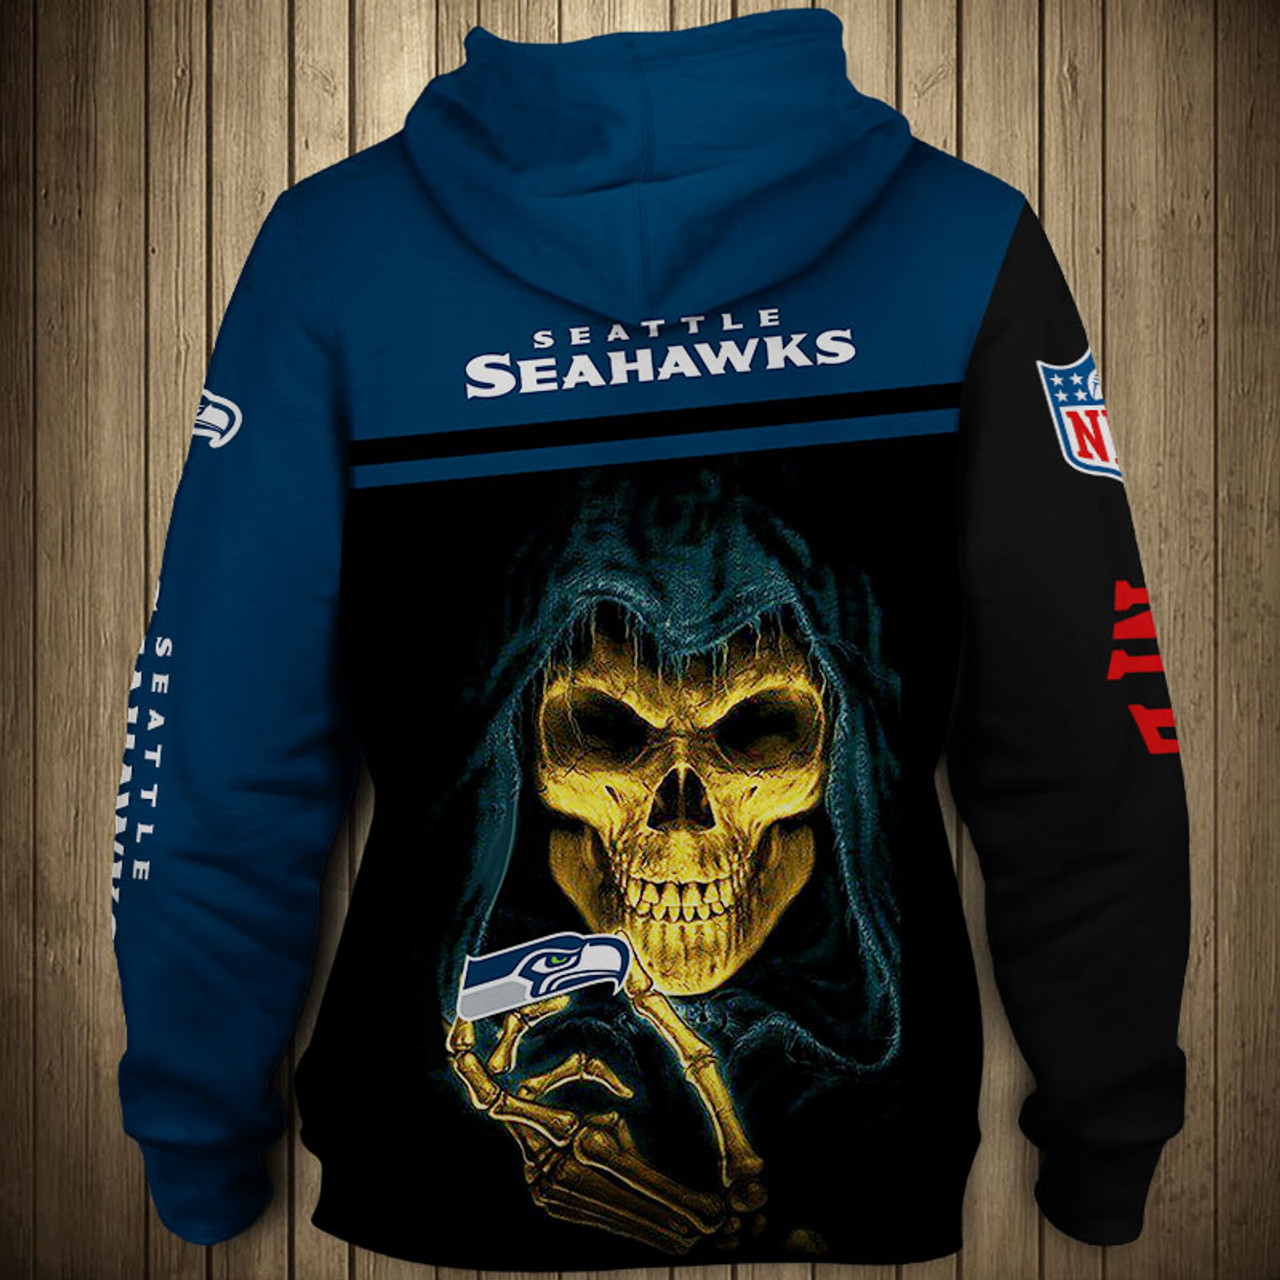  **(OFFICIAL-NEW-N.F.L.SEATTLE-SEAHAWKS-TEAM-PULLOVER-HOODIES/NICE-CUSTOM-3D-GRAPHIC-PRINTED-DOUBLE-SIDED-ALL-OVER-GRAPHIC-SEAHAWKS-LOGOS & OFFICIAL-SEAHAWKS-TEAM-COLORS/WARM-PREMIUM-OFFICIAL-N.F.L.SEAHAWKS-TEAM-TRENDY-PULLOVER-GAME-DAY-HOODIES)**